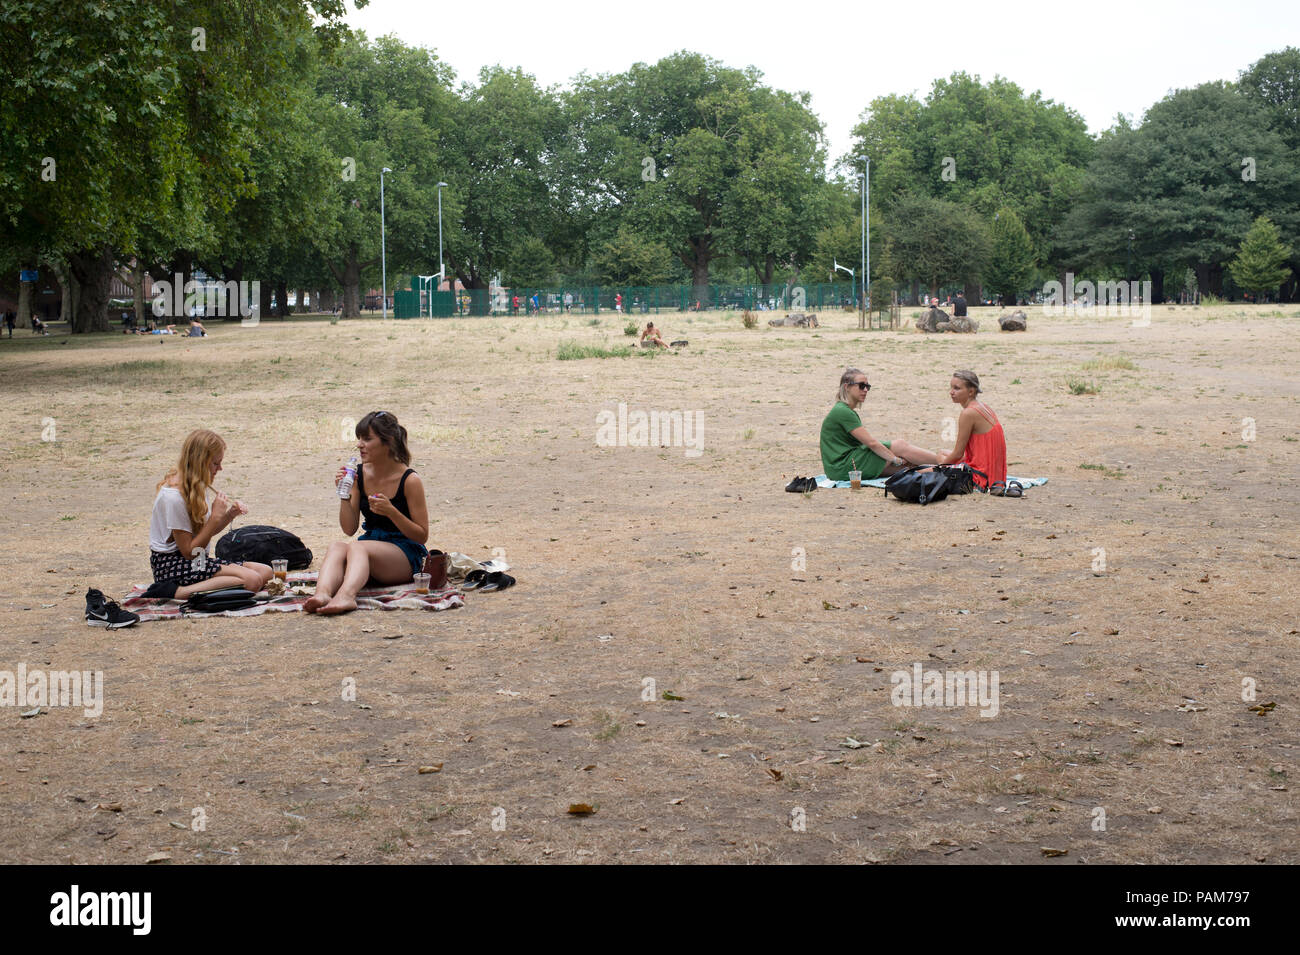 Hackney, London. London Fields. Parched earth. Stock Photo